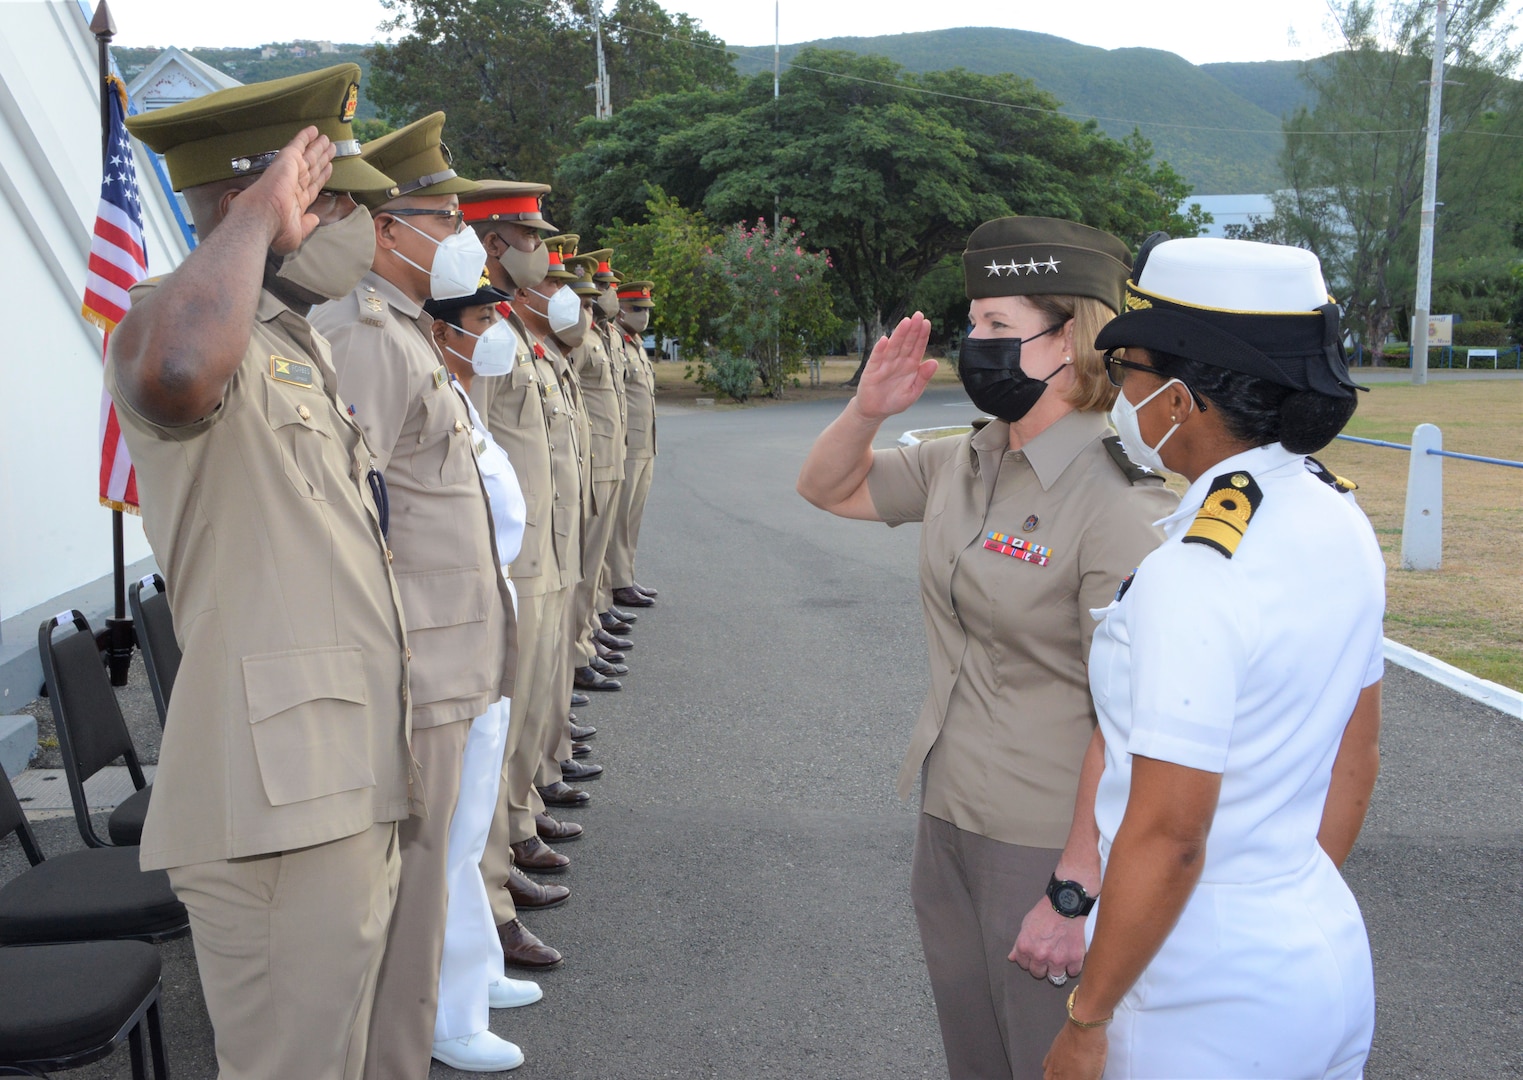 Honors are rendered as the Commander of U.S. Southern Command, U.S. Army Gen. Laura Richardson, and Jamaica Defence Force (JDF) Chief of Defence Staff, Rear Adm. Antonette Wemyss Gorman, arrive for a bilateral meeting in Jamaica.